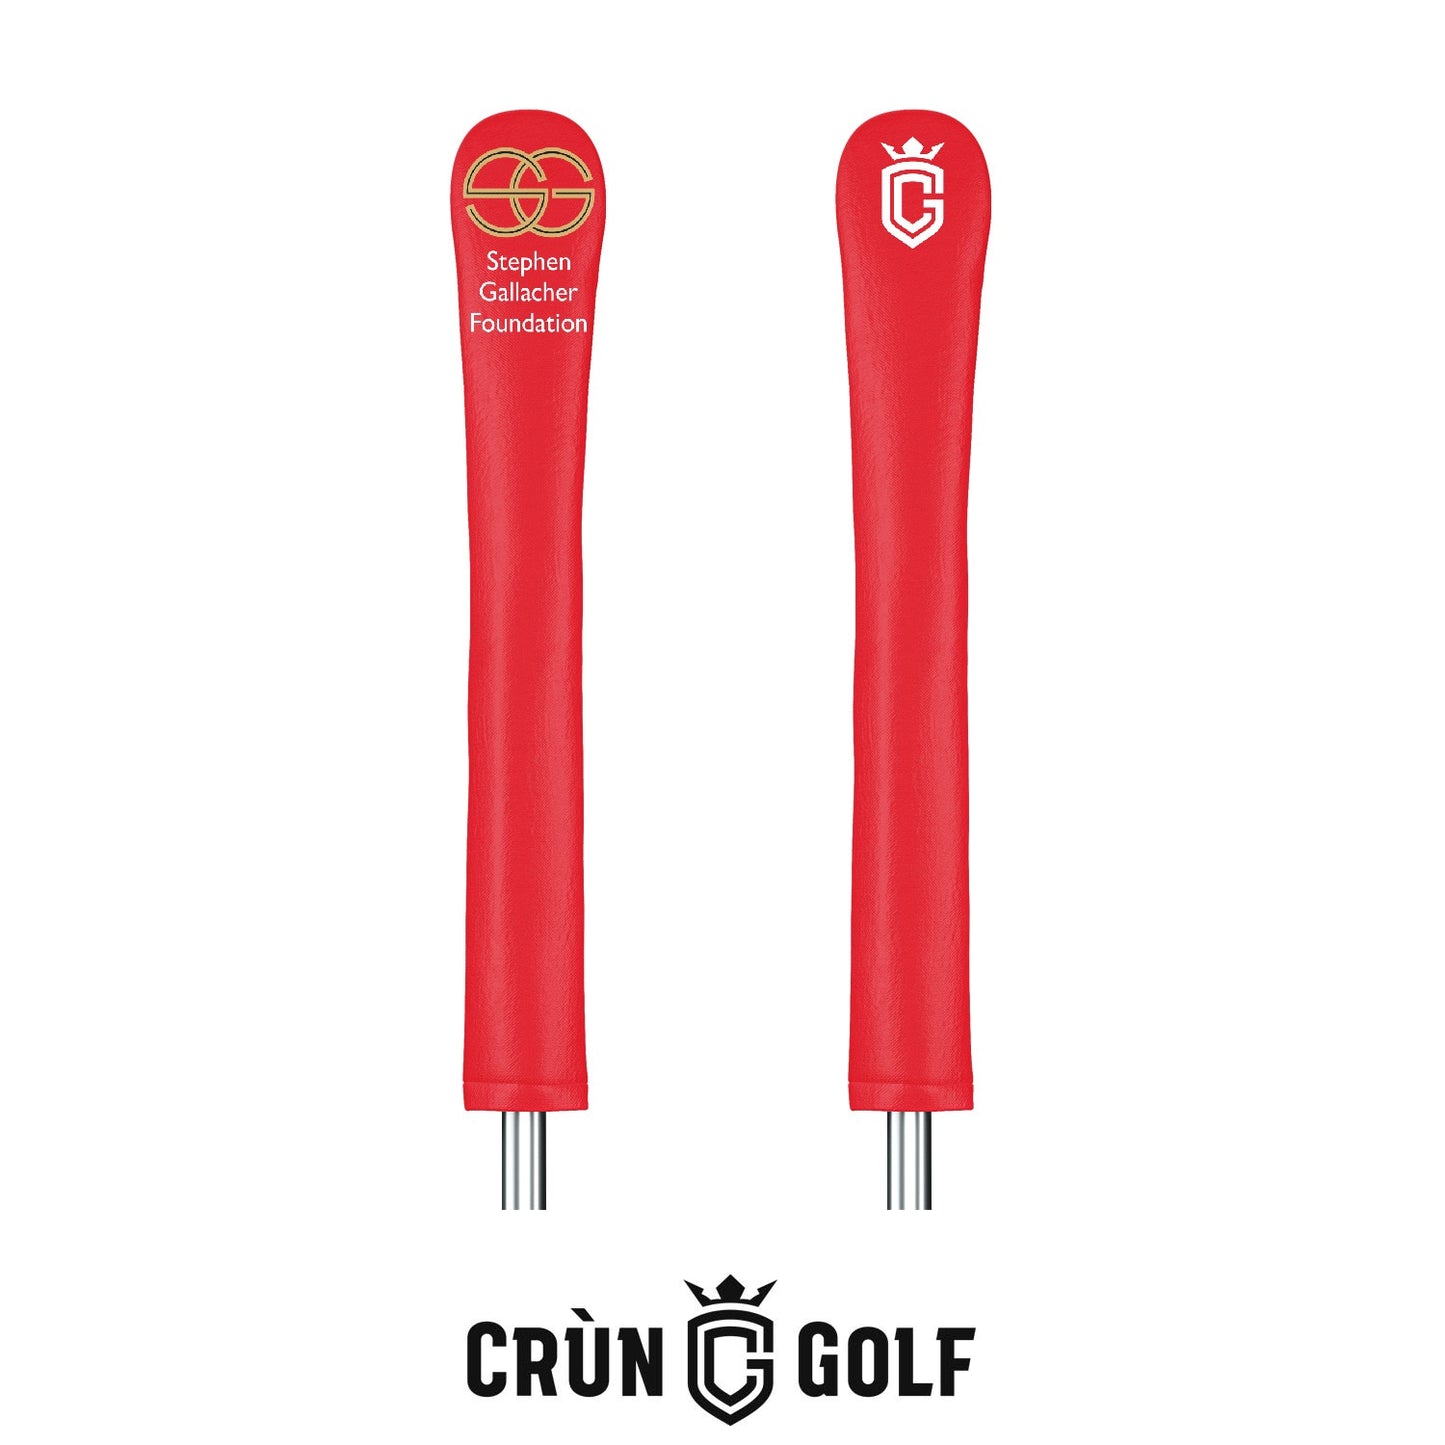 Stephen Gallacher Foundation Alignment Stick Cover - Red